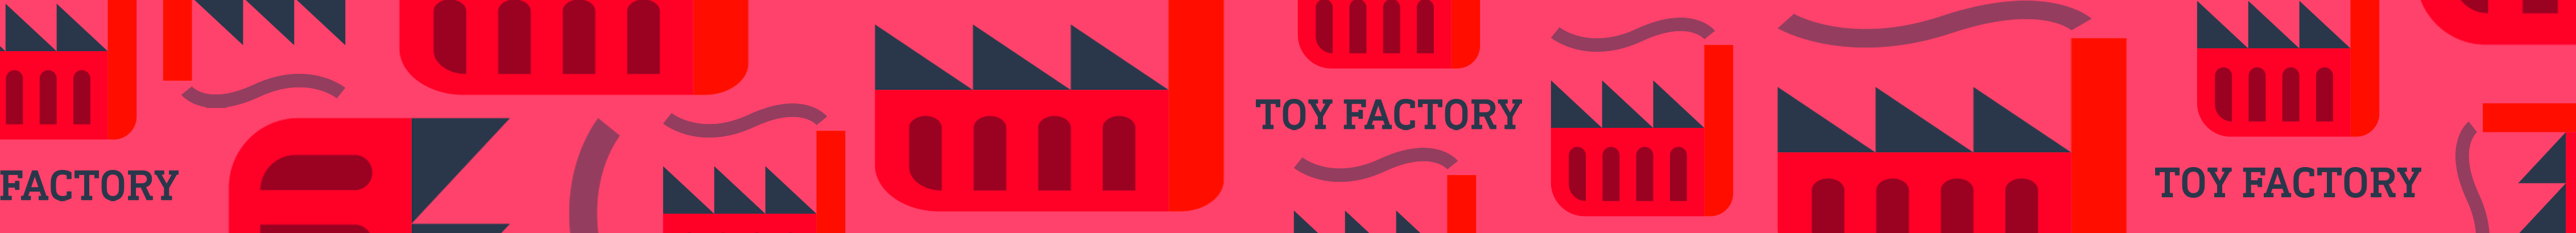 Toy Factory's profile banner